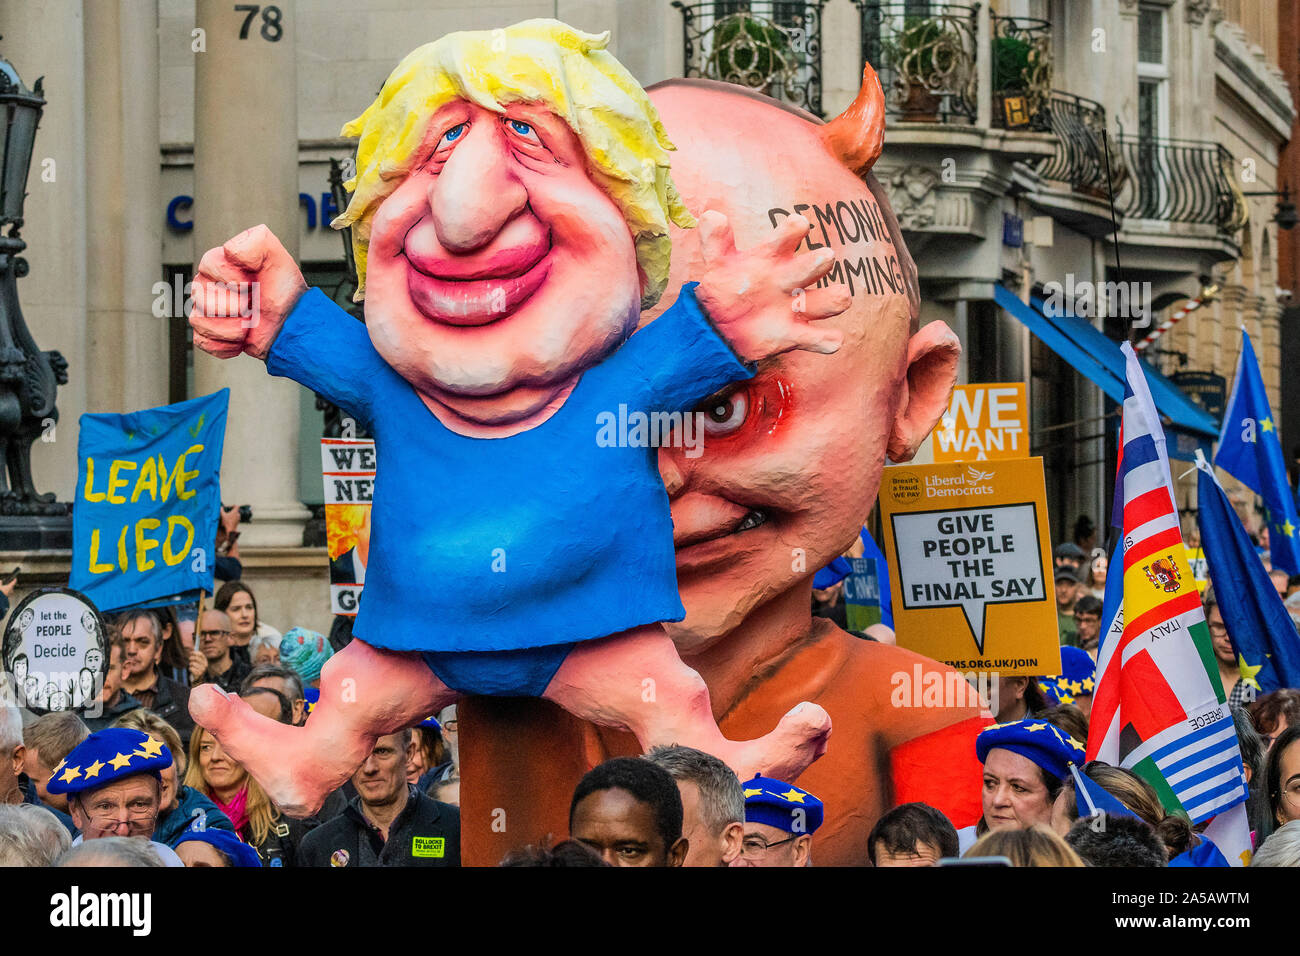 London, UK. 19th Oct, 2019. Effigies of Boris Johnson being operated like a puppet by Dominic Cummings - Stop Brexit, people's vote march from the west end to Westminster. Credit: Guy Bell/Alamy Live News Stock Photo